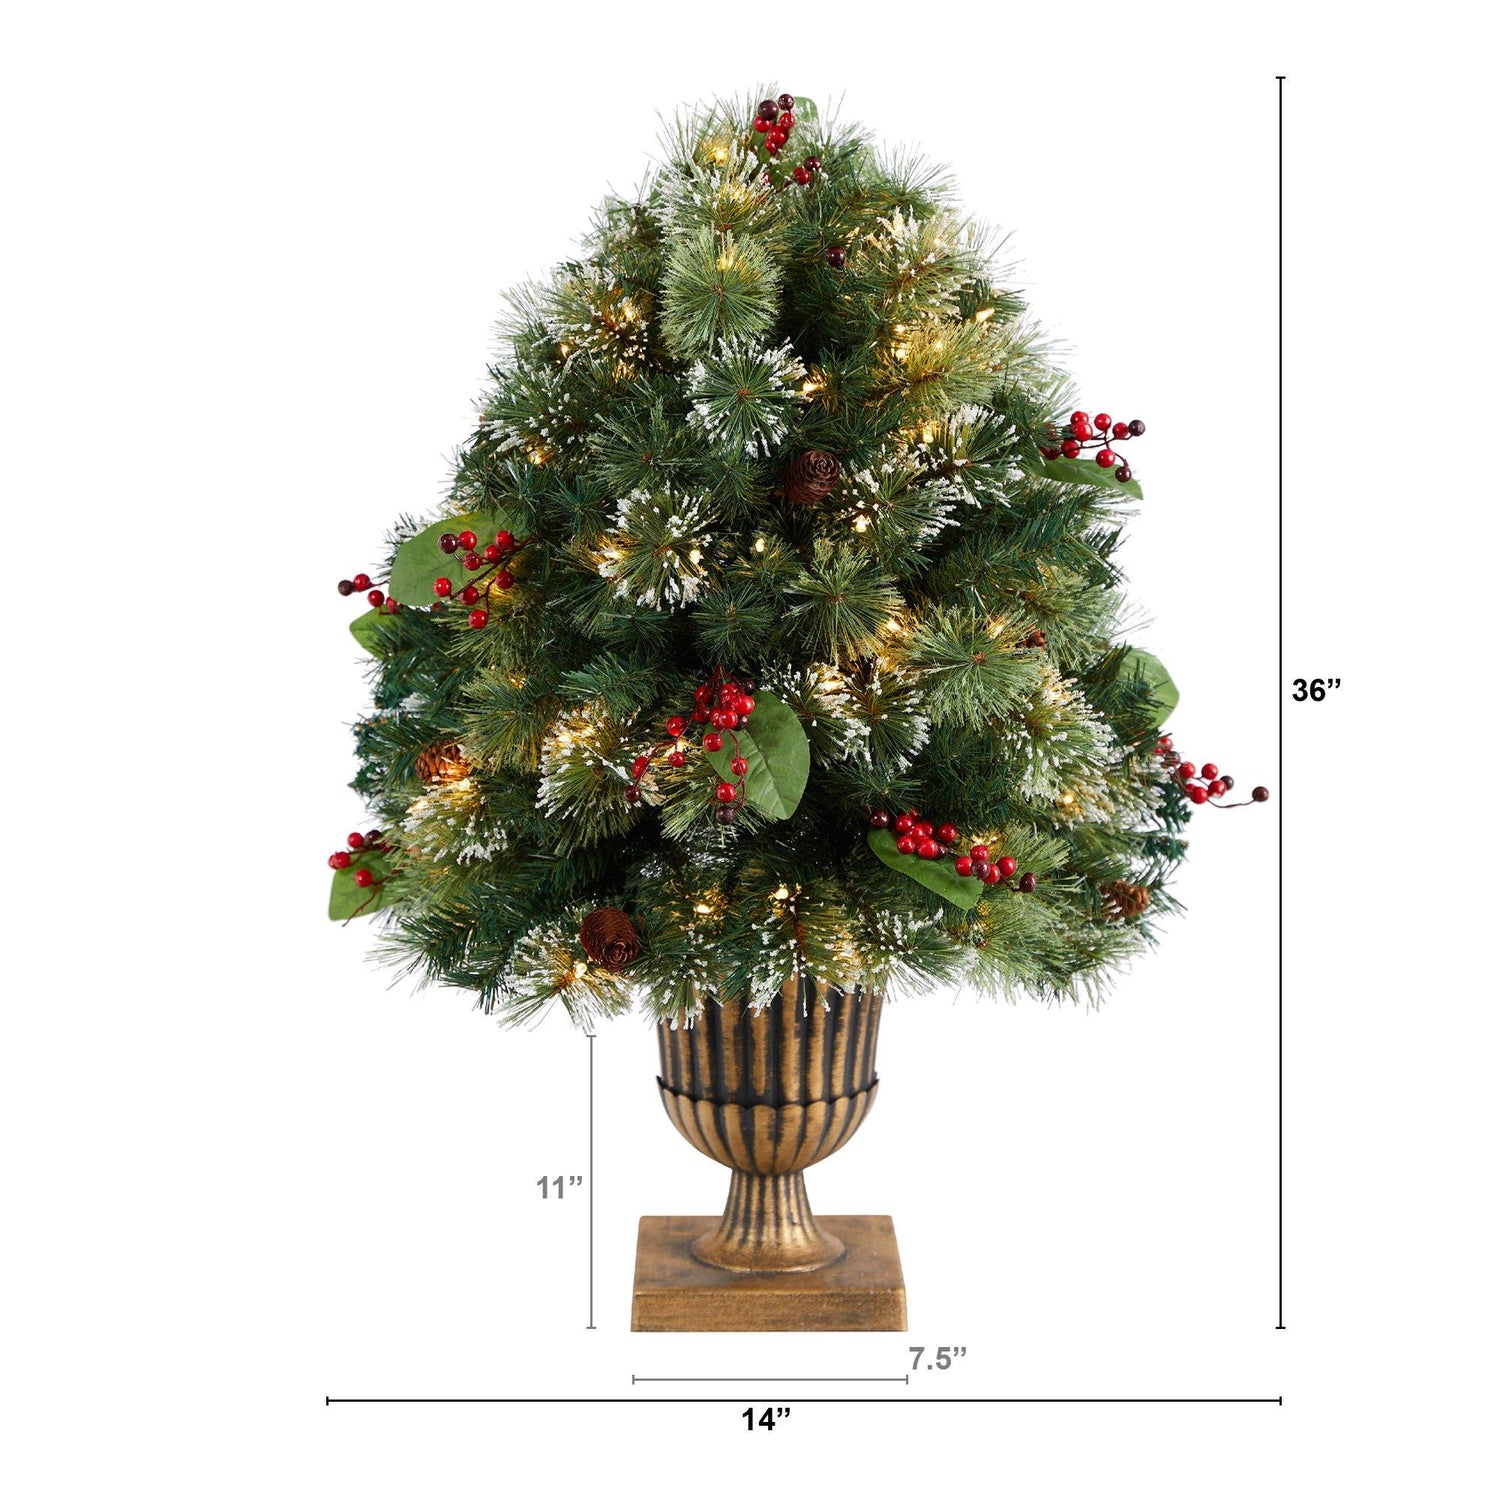 3' Holiday Pre-Lit Snow Tip Greenery, Berries and Pinecones Plant in Urn with 100 LED Lights